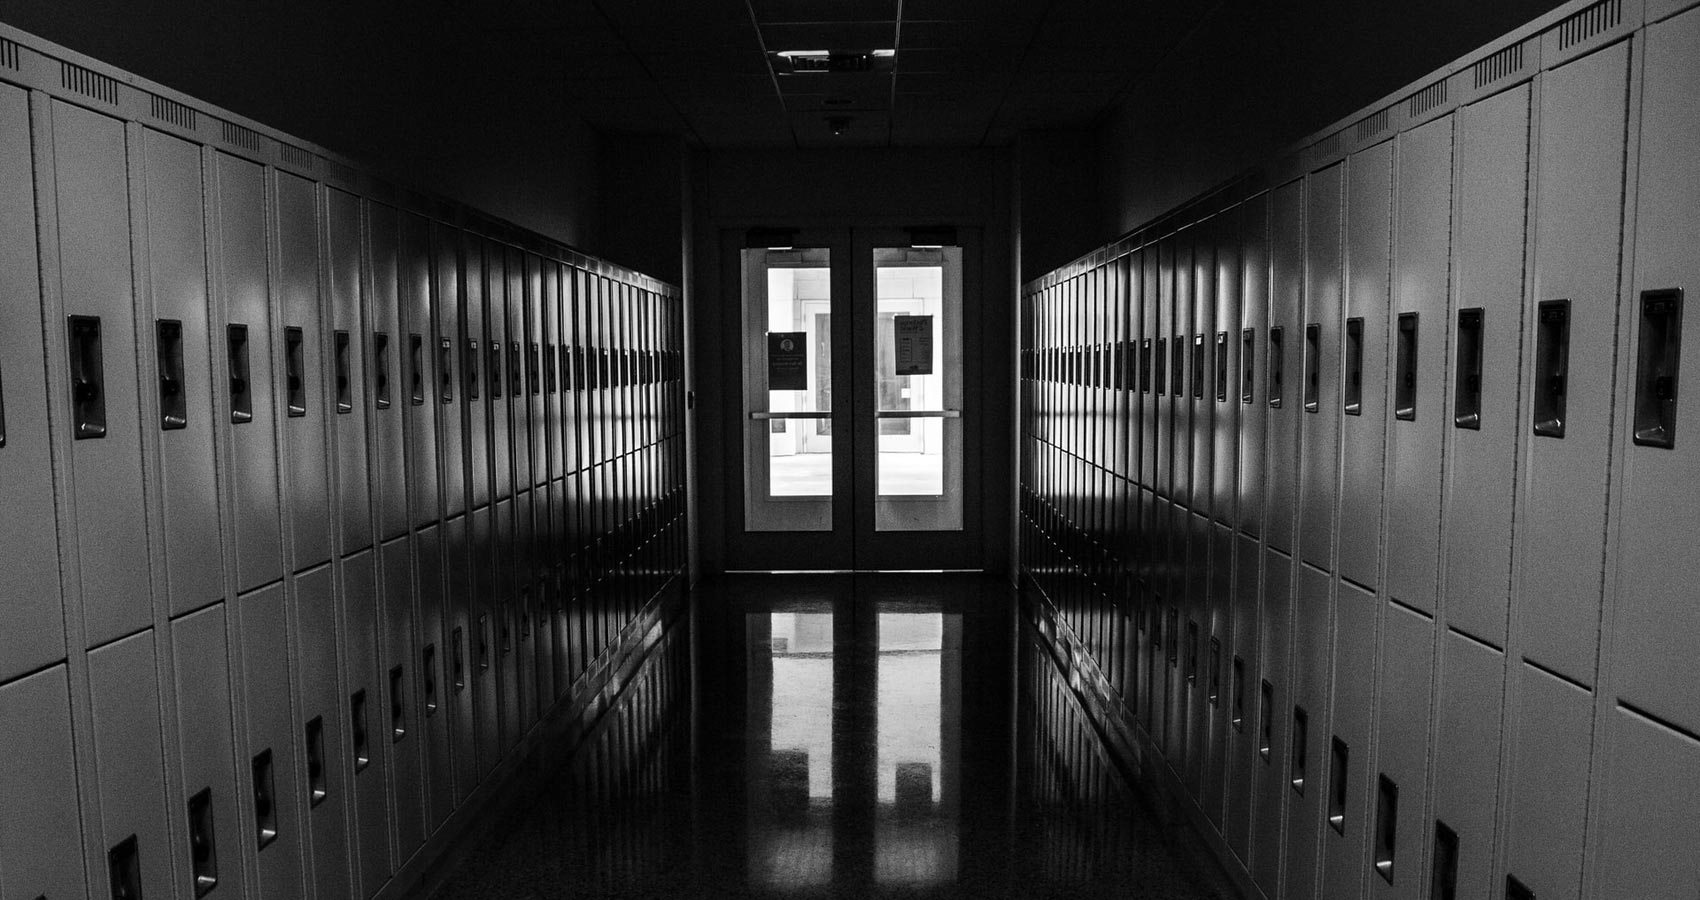 School's Out Early, a poem by Joni Caggiano at Spillwords.com